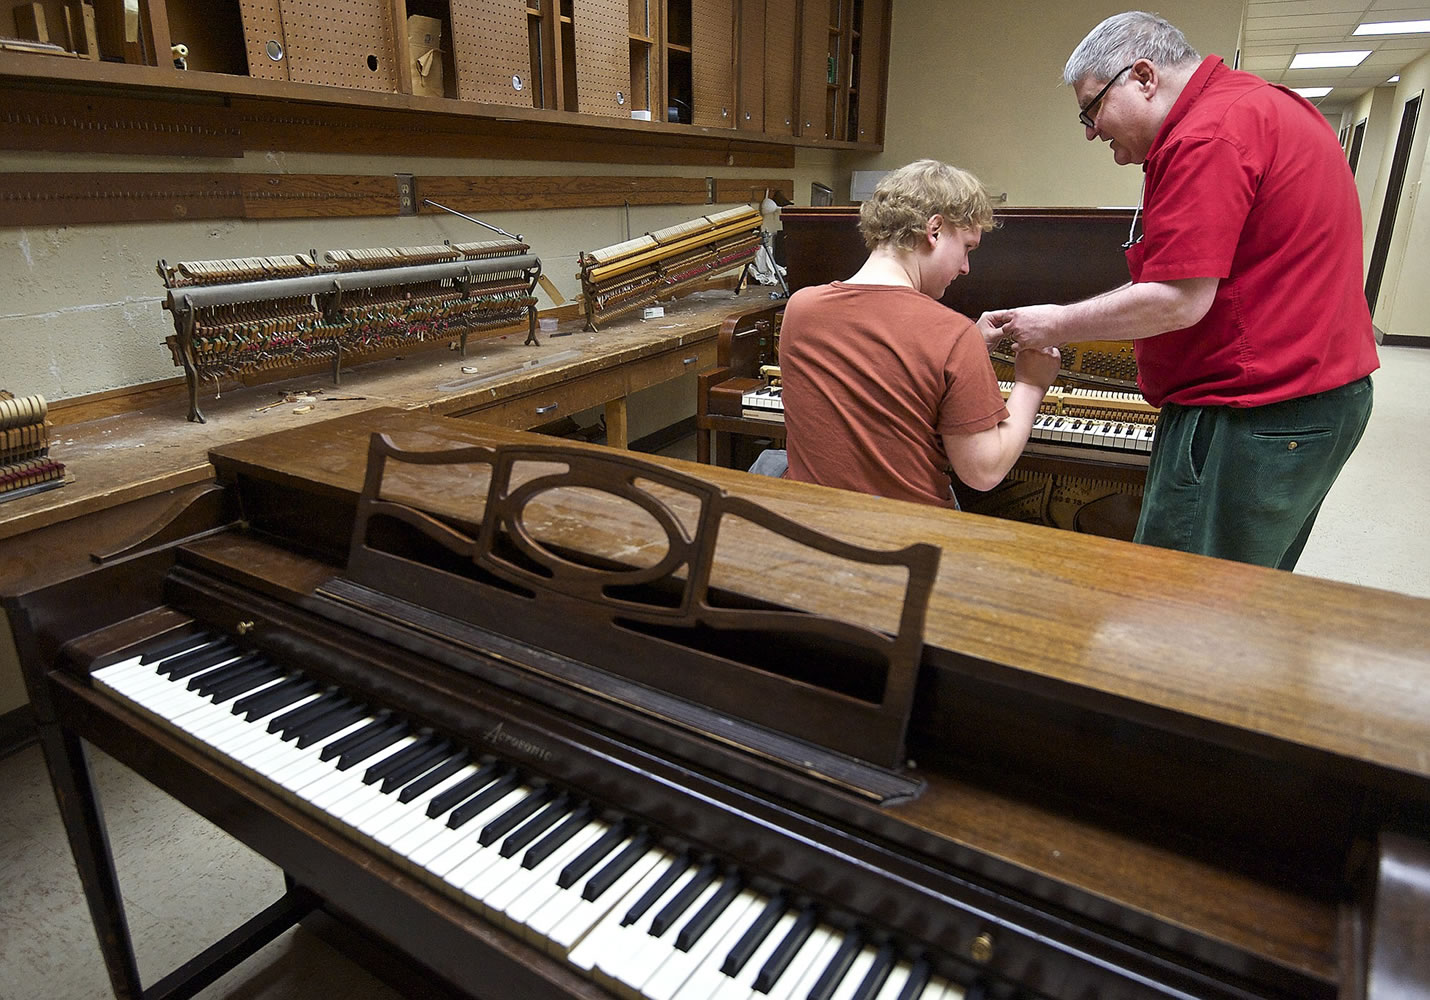 Don Mitchell works with student Stefan Kincaid, 25, of Sennett, N.Y.